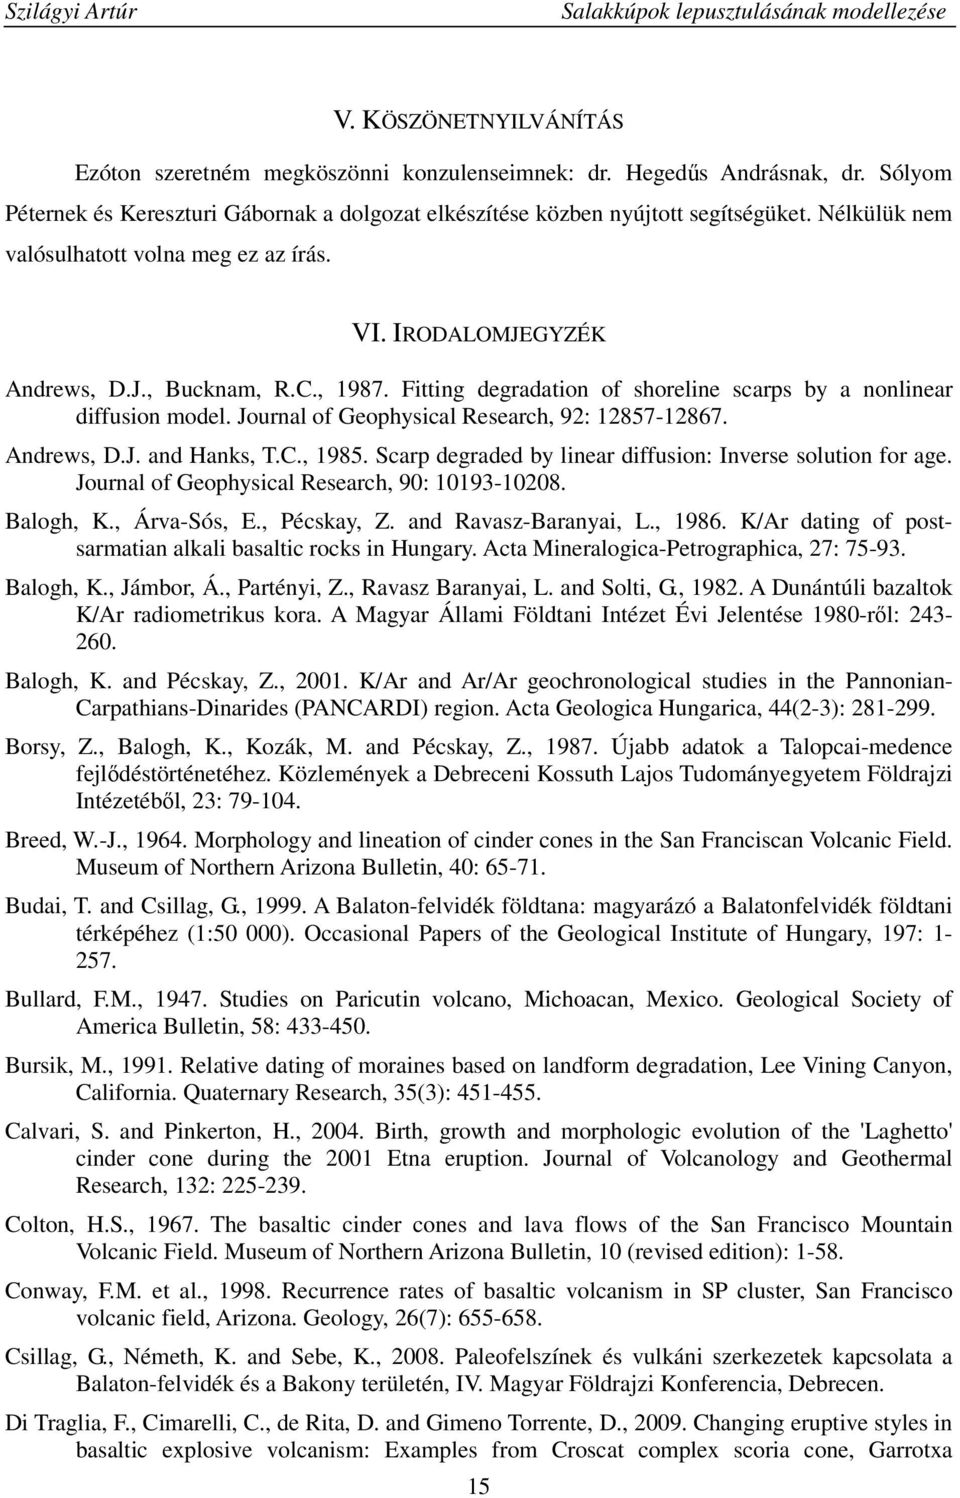 Journal of Geophysical Research, 92: 12857-12867. Andrews, D.J. and Hanks, T.C., 1985. Scarp degraded by linear diffusion: Inverse solution for age. Journal of Geophysical Research, 90: 10193-10208.